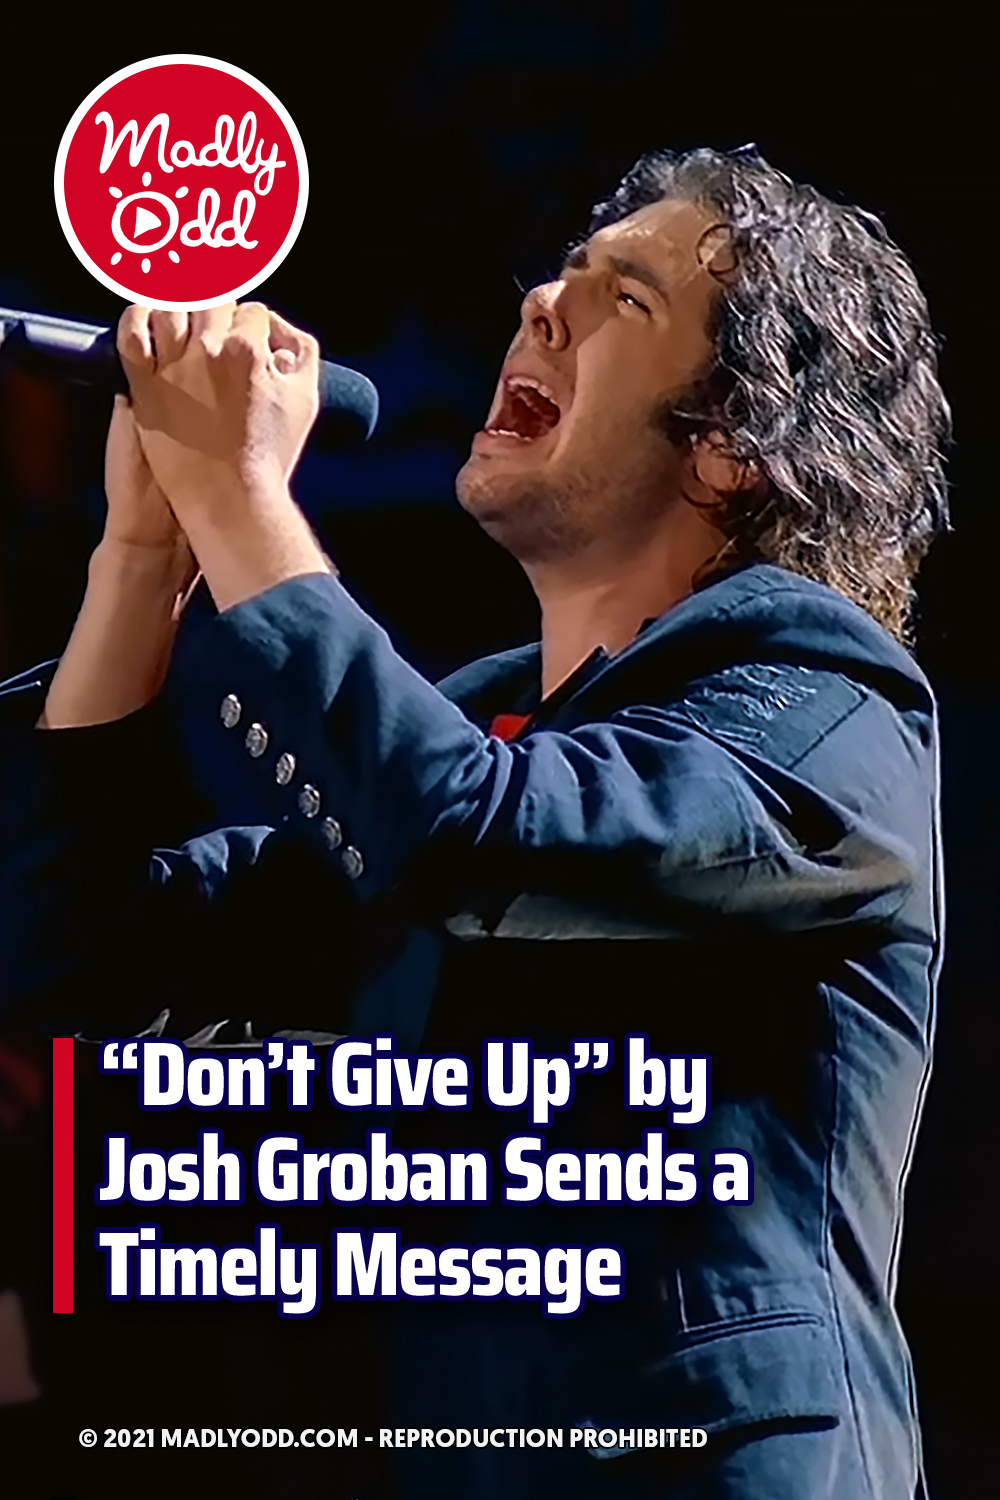 “Don’t Give Up” by Josh Groban Sends a Timely Message